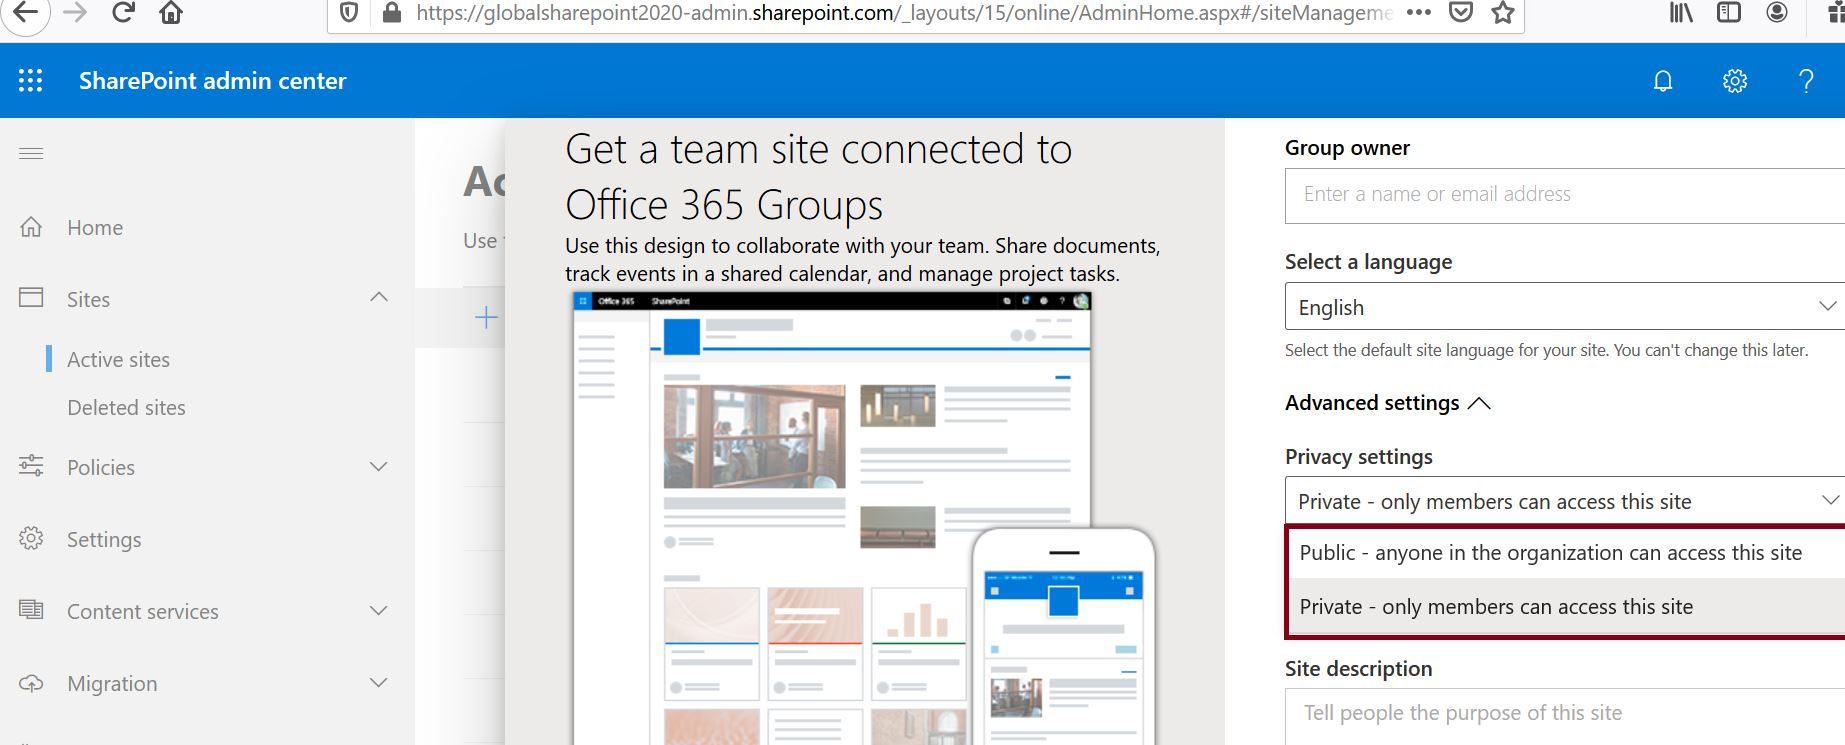 Get a team site connected to Office 365 Groups - Privacy settings